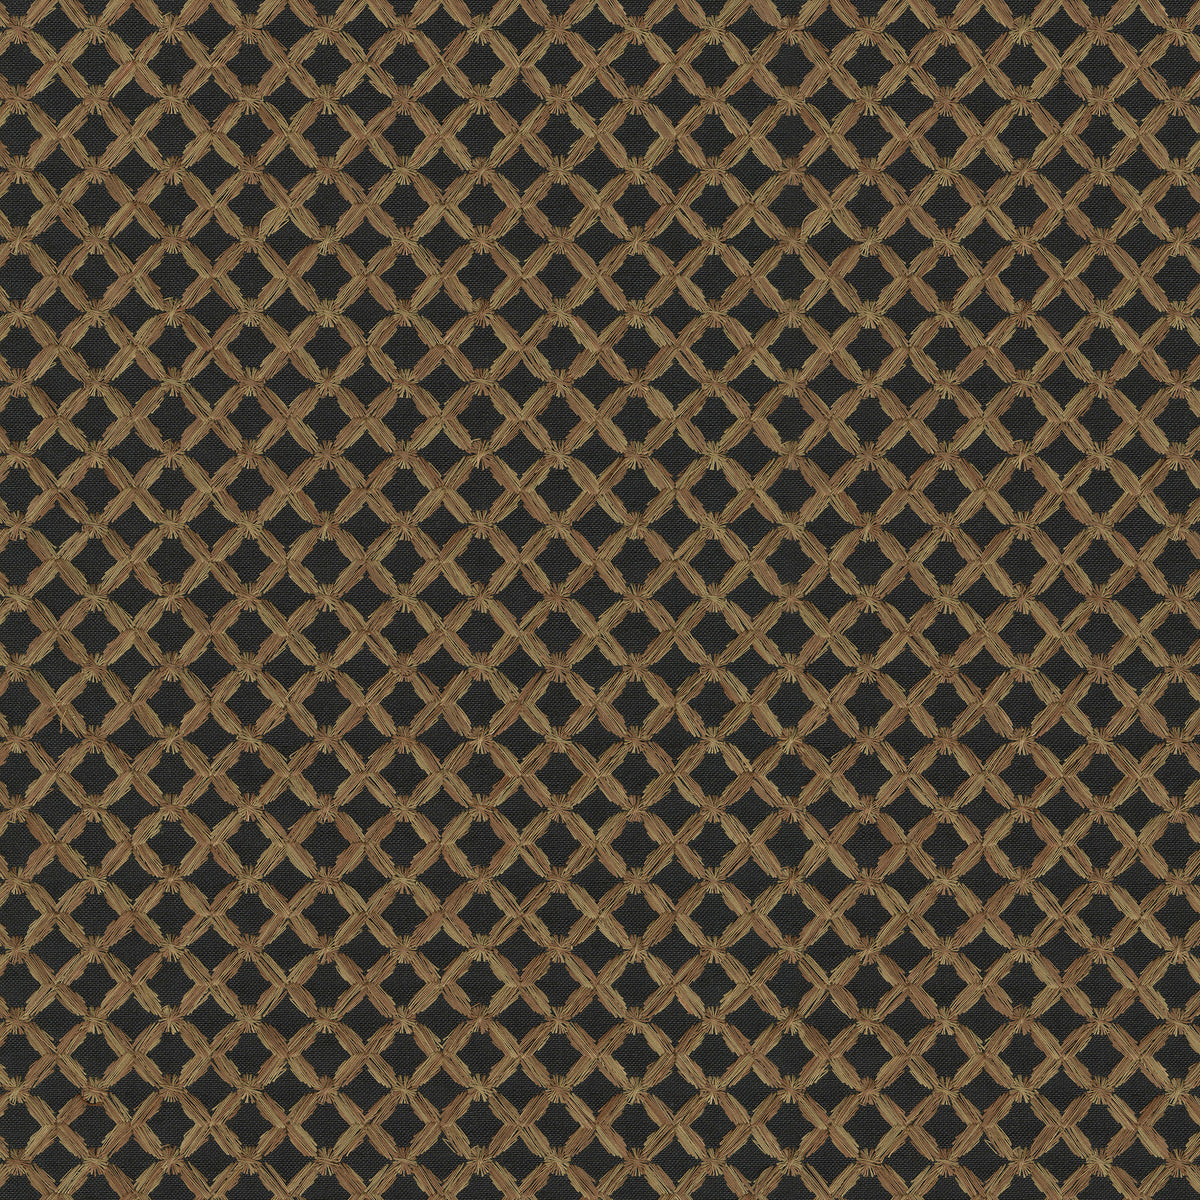 P/K Lifestyles Laguna Embroidery - Sable 412481 Upholstery Fabric